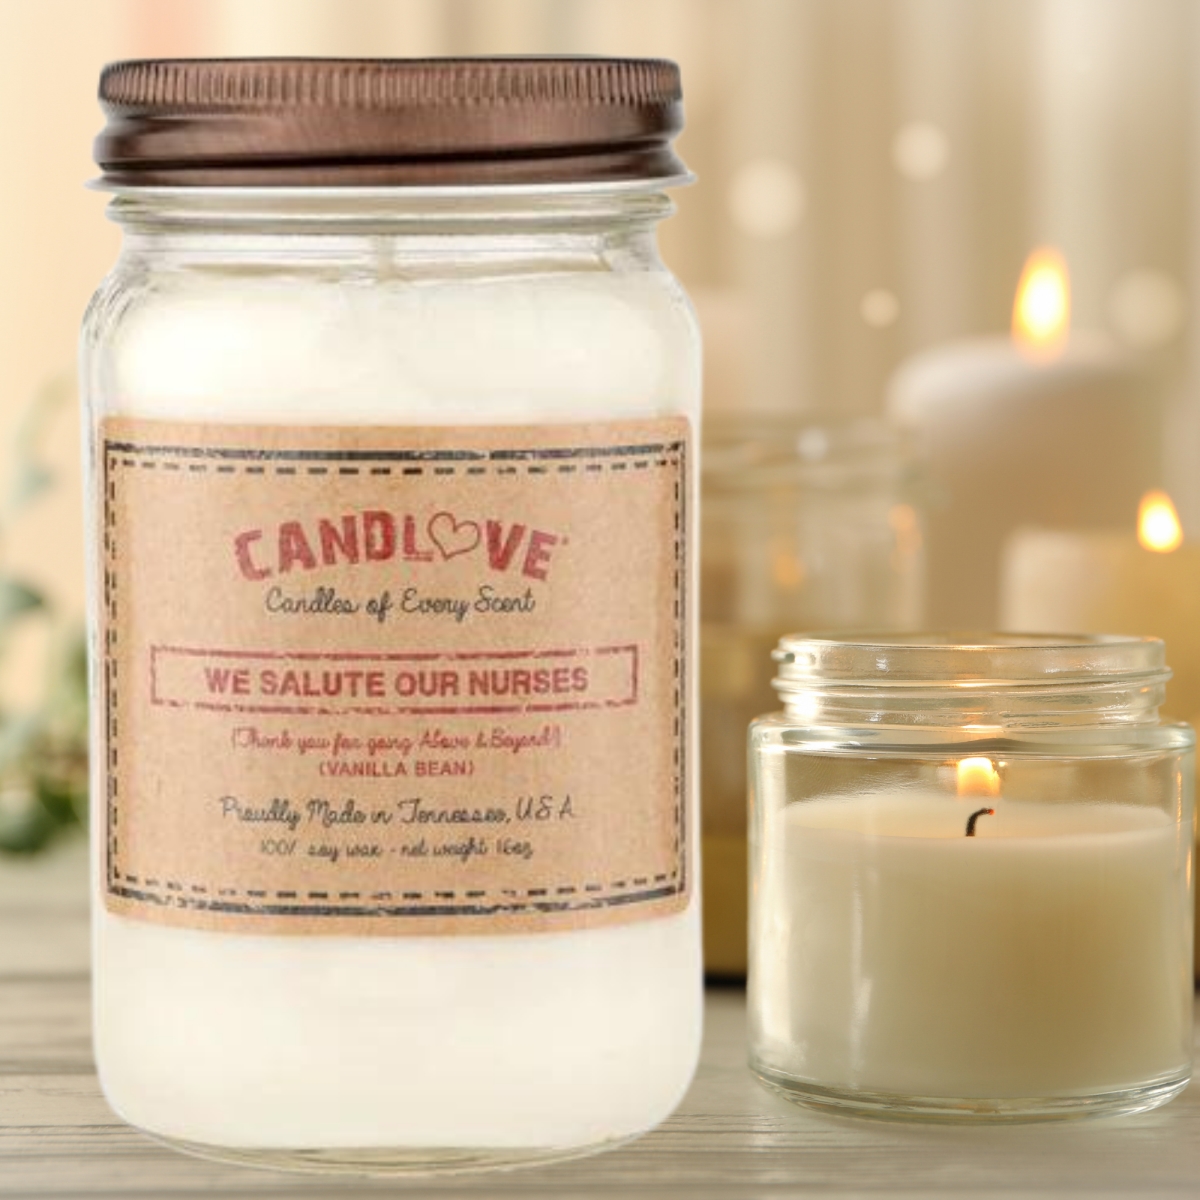 Picture of PPI SUPPLIES Vanilla-N-C Candlove Vanilla We Salute Nurses Scented Candle - Non-Toxic 100% Soy Candle - Handmade & Hand Poured Long Burning Candle - Highly Scented All Natural Clean Burning Candle (16 OZ Mason Jar) Made in The USA